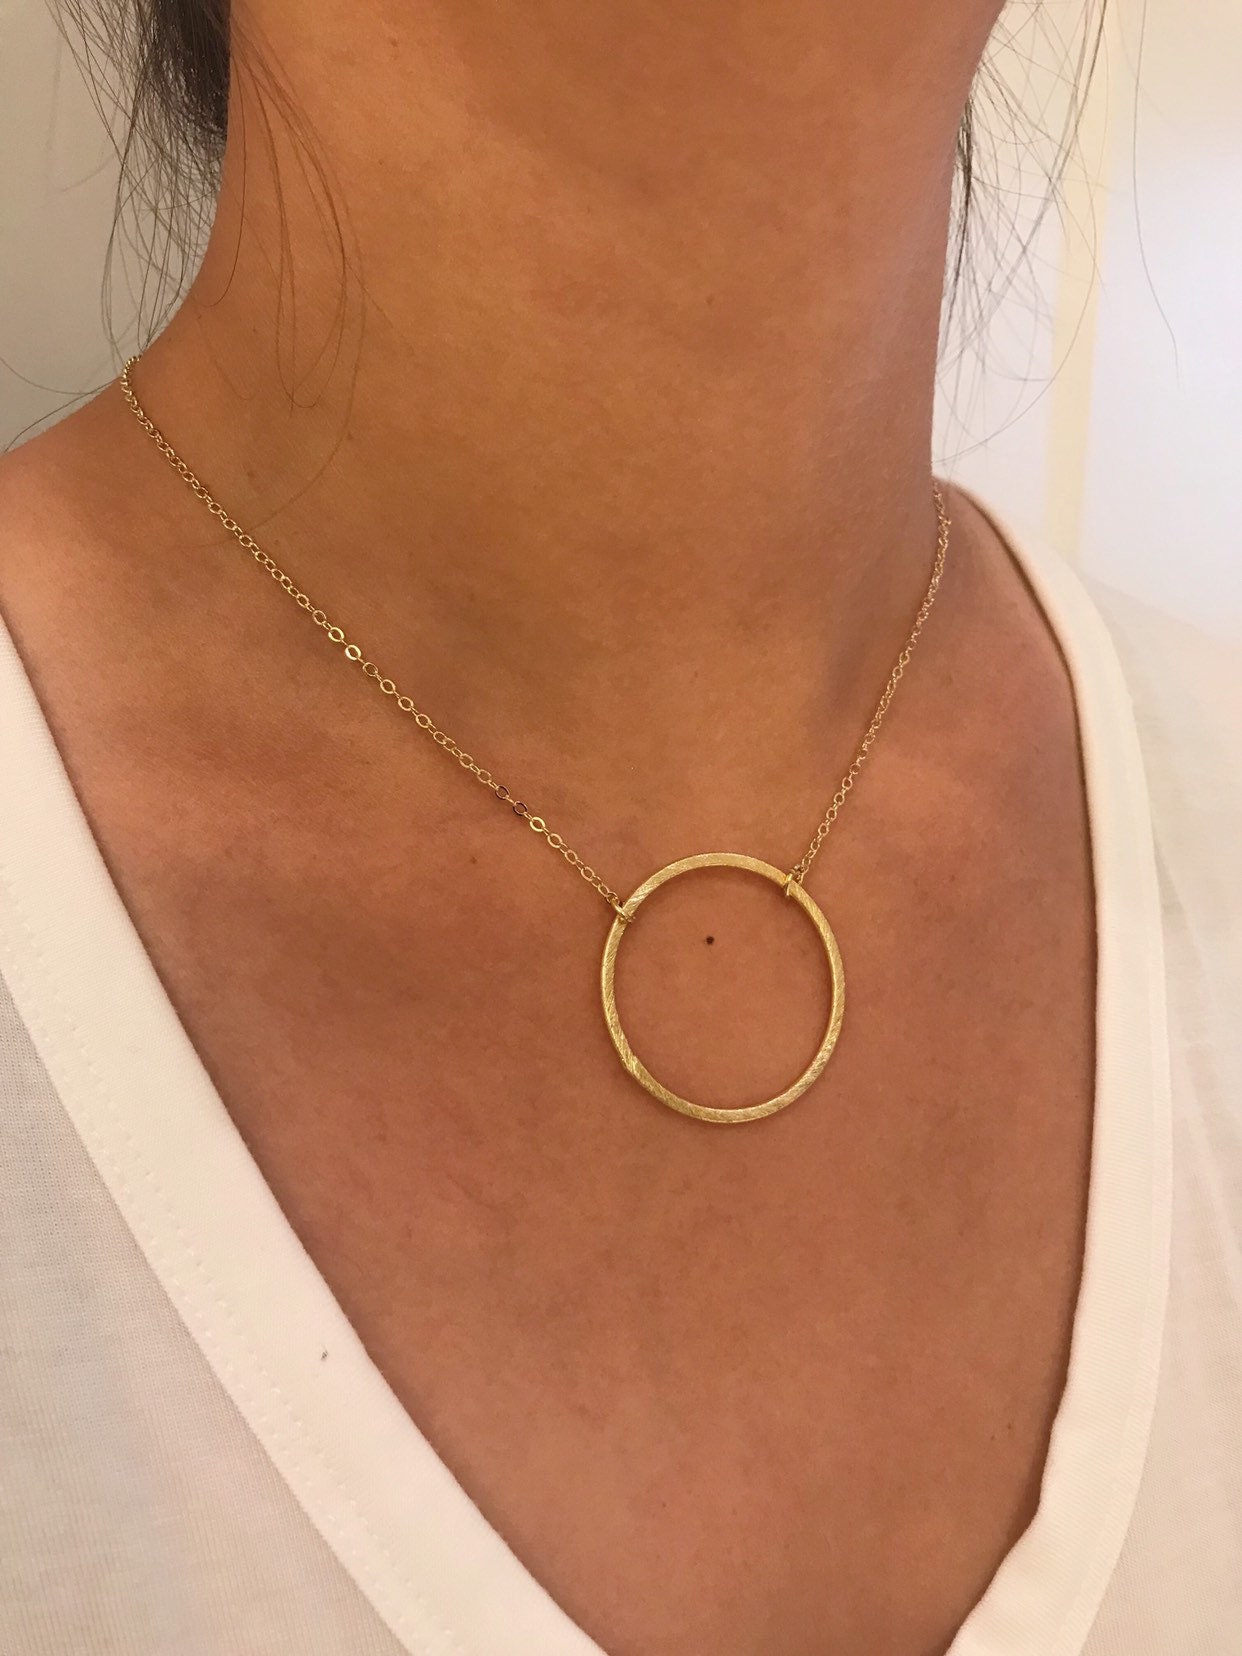 Delicate Necklace Gold Hammered Ring Necklace 14k Gold Filled Bridal Necklace  FREE SHIPPING!